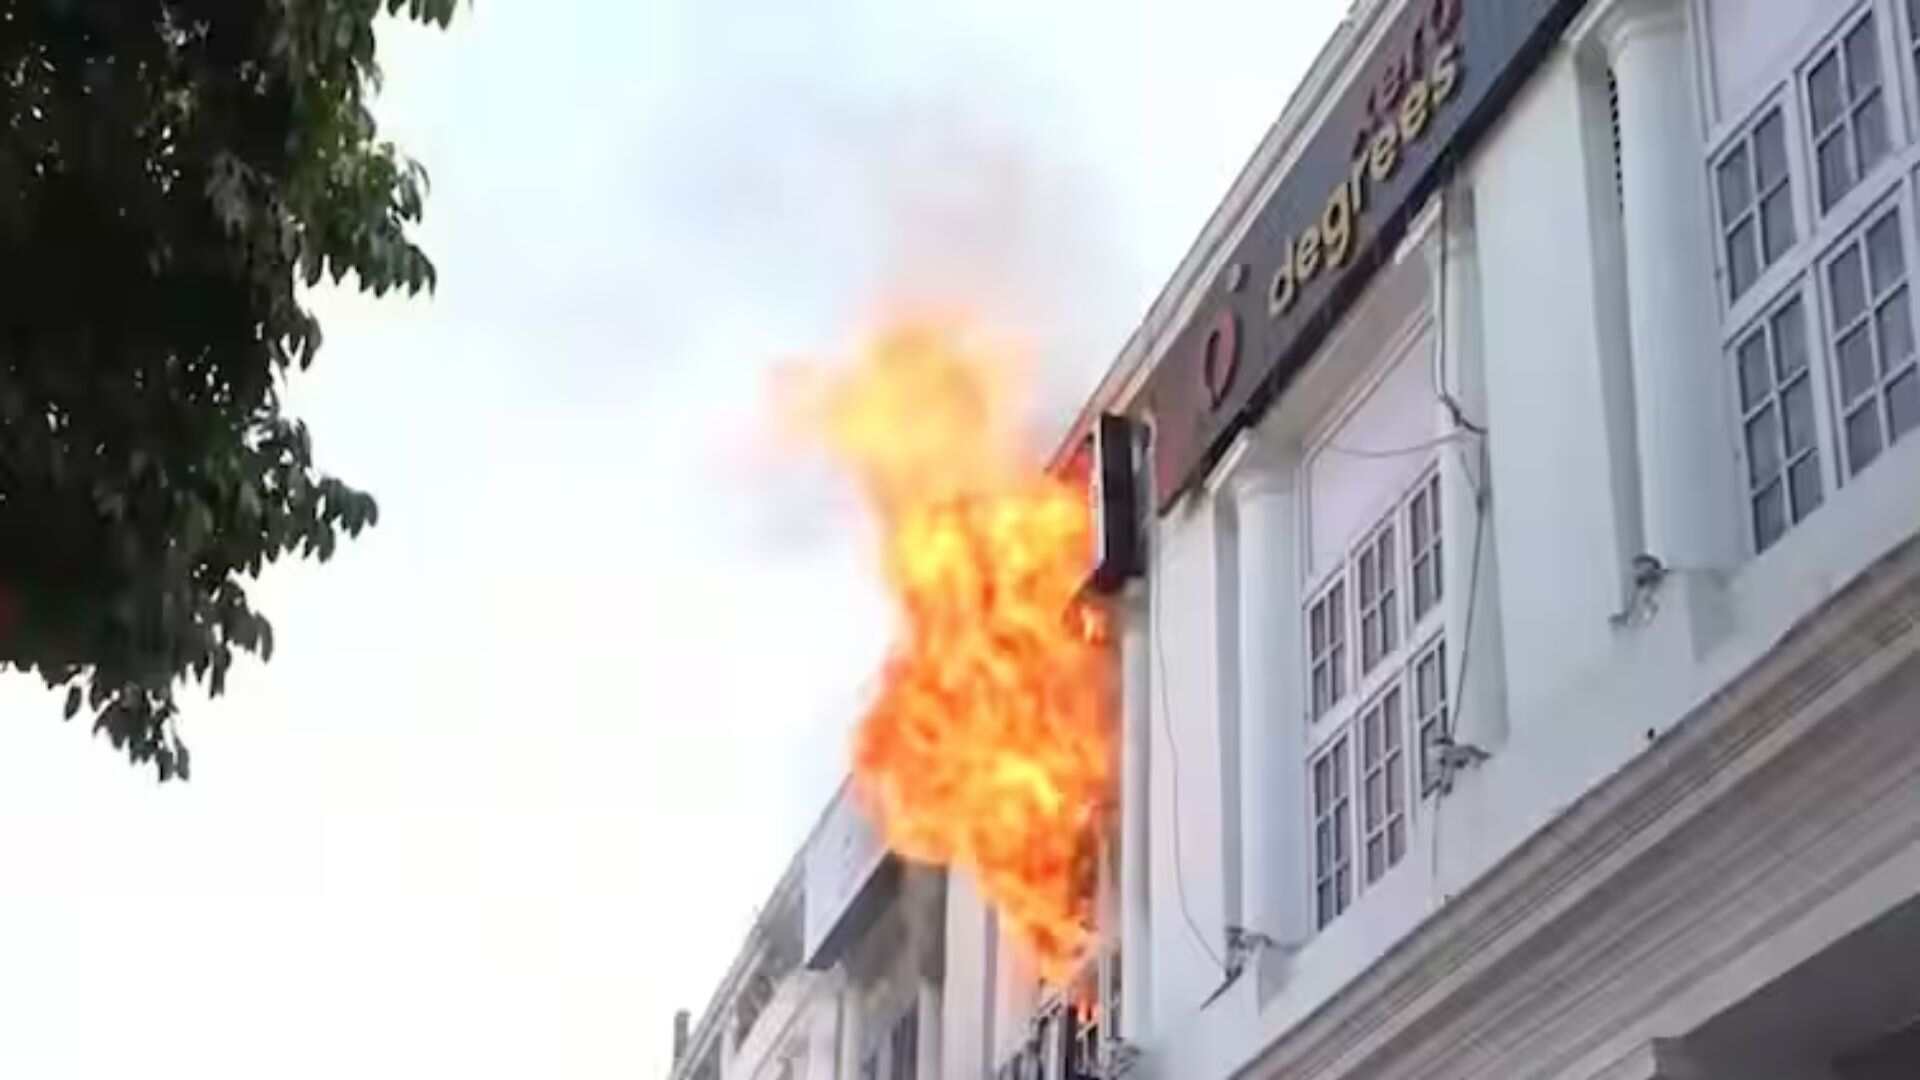 Fire Breaks Out In Mystery Rooms Of Delhi’s Connaught Place